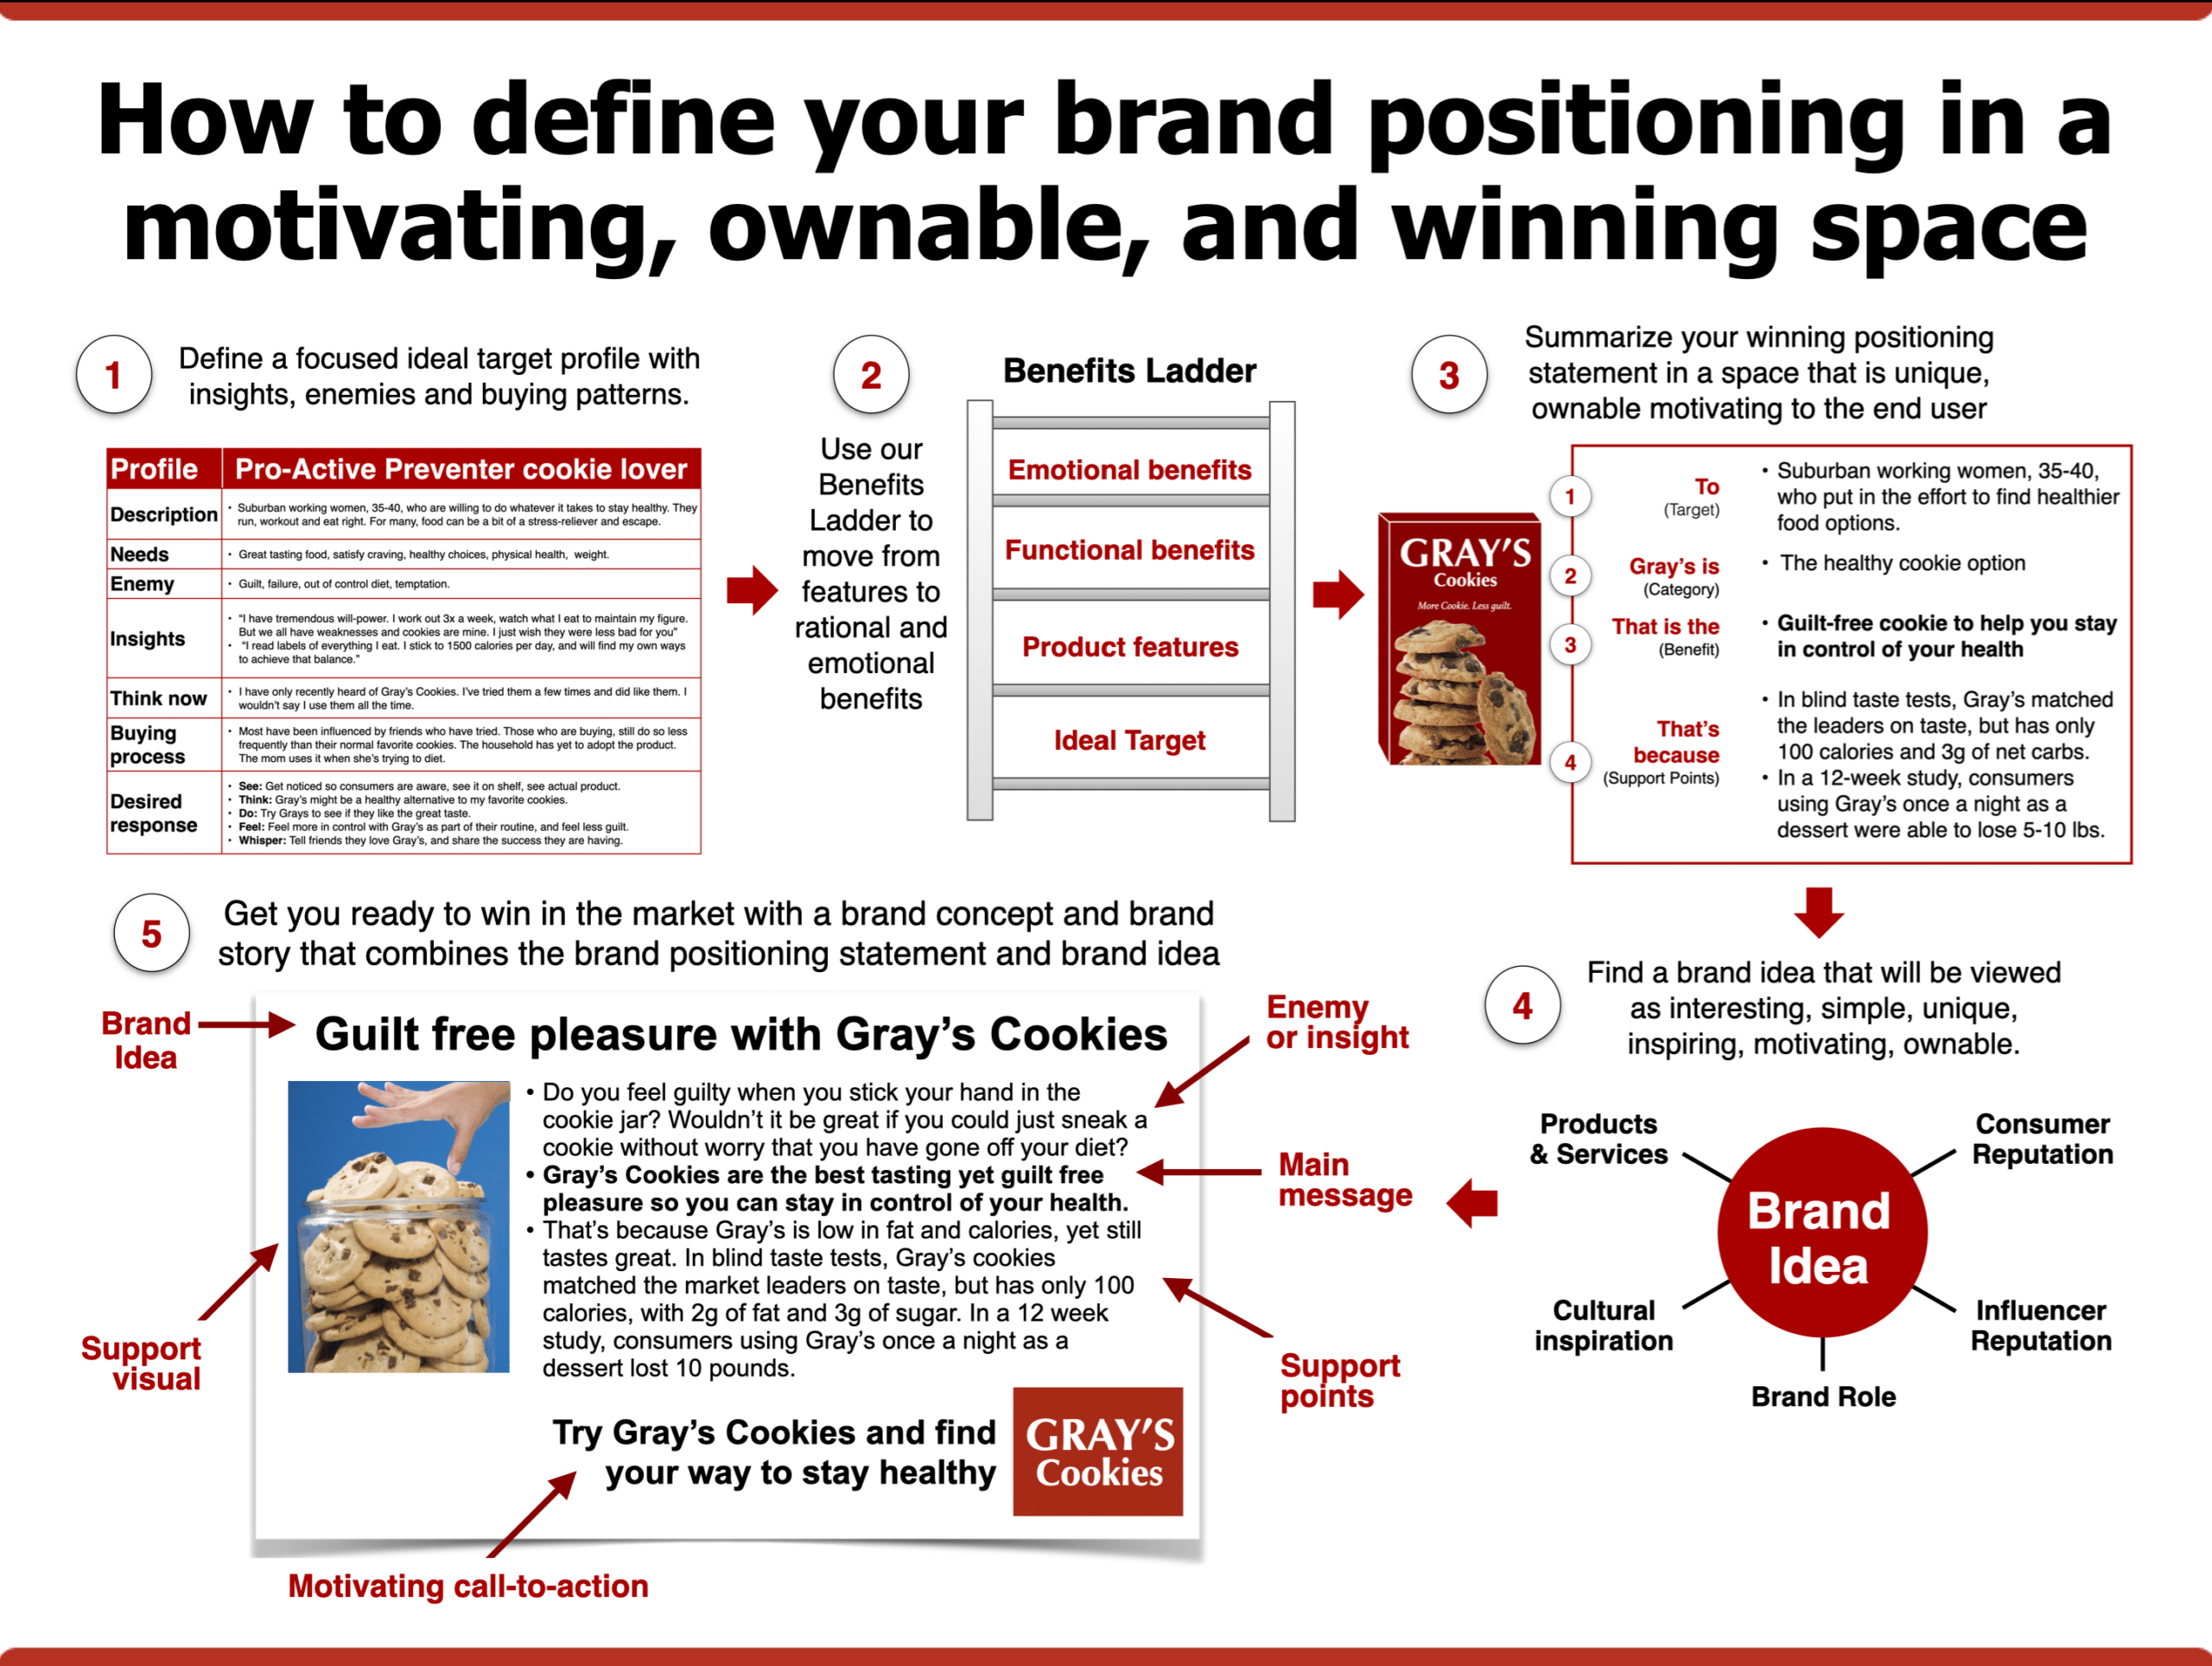 How to define your brand positioning